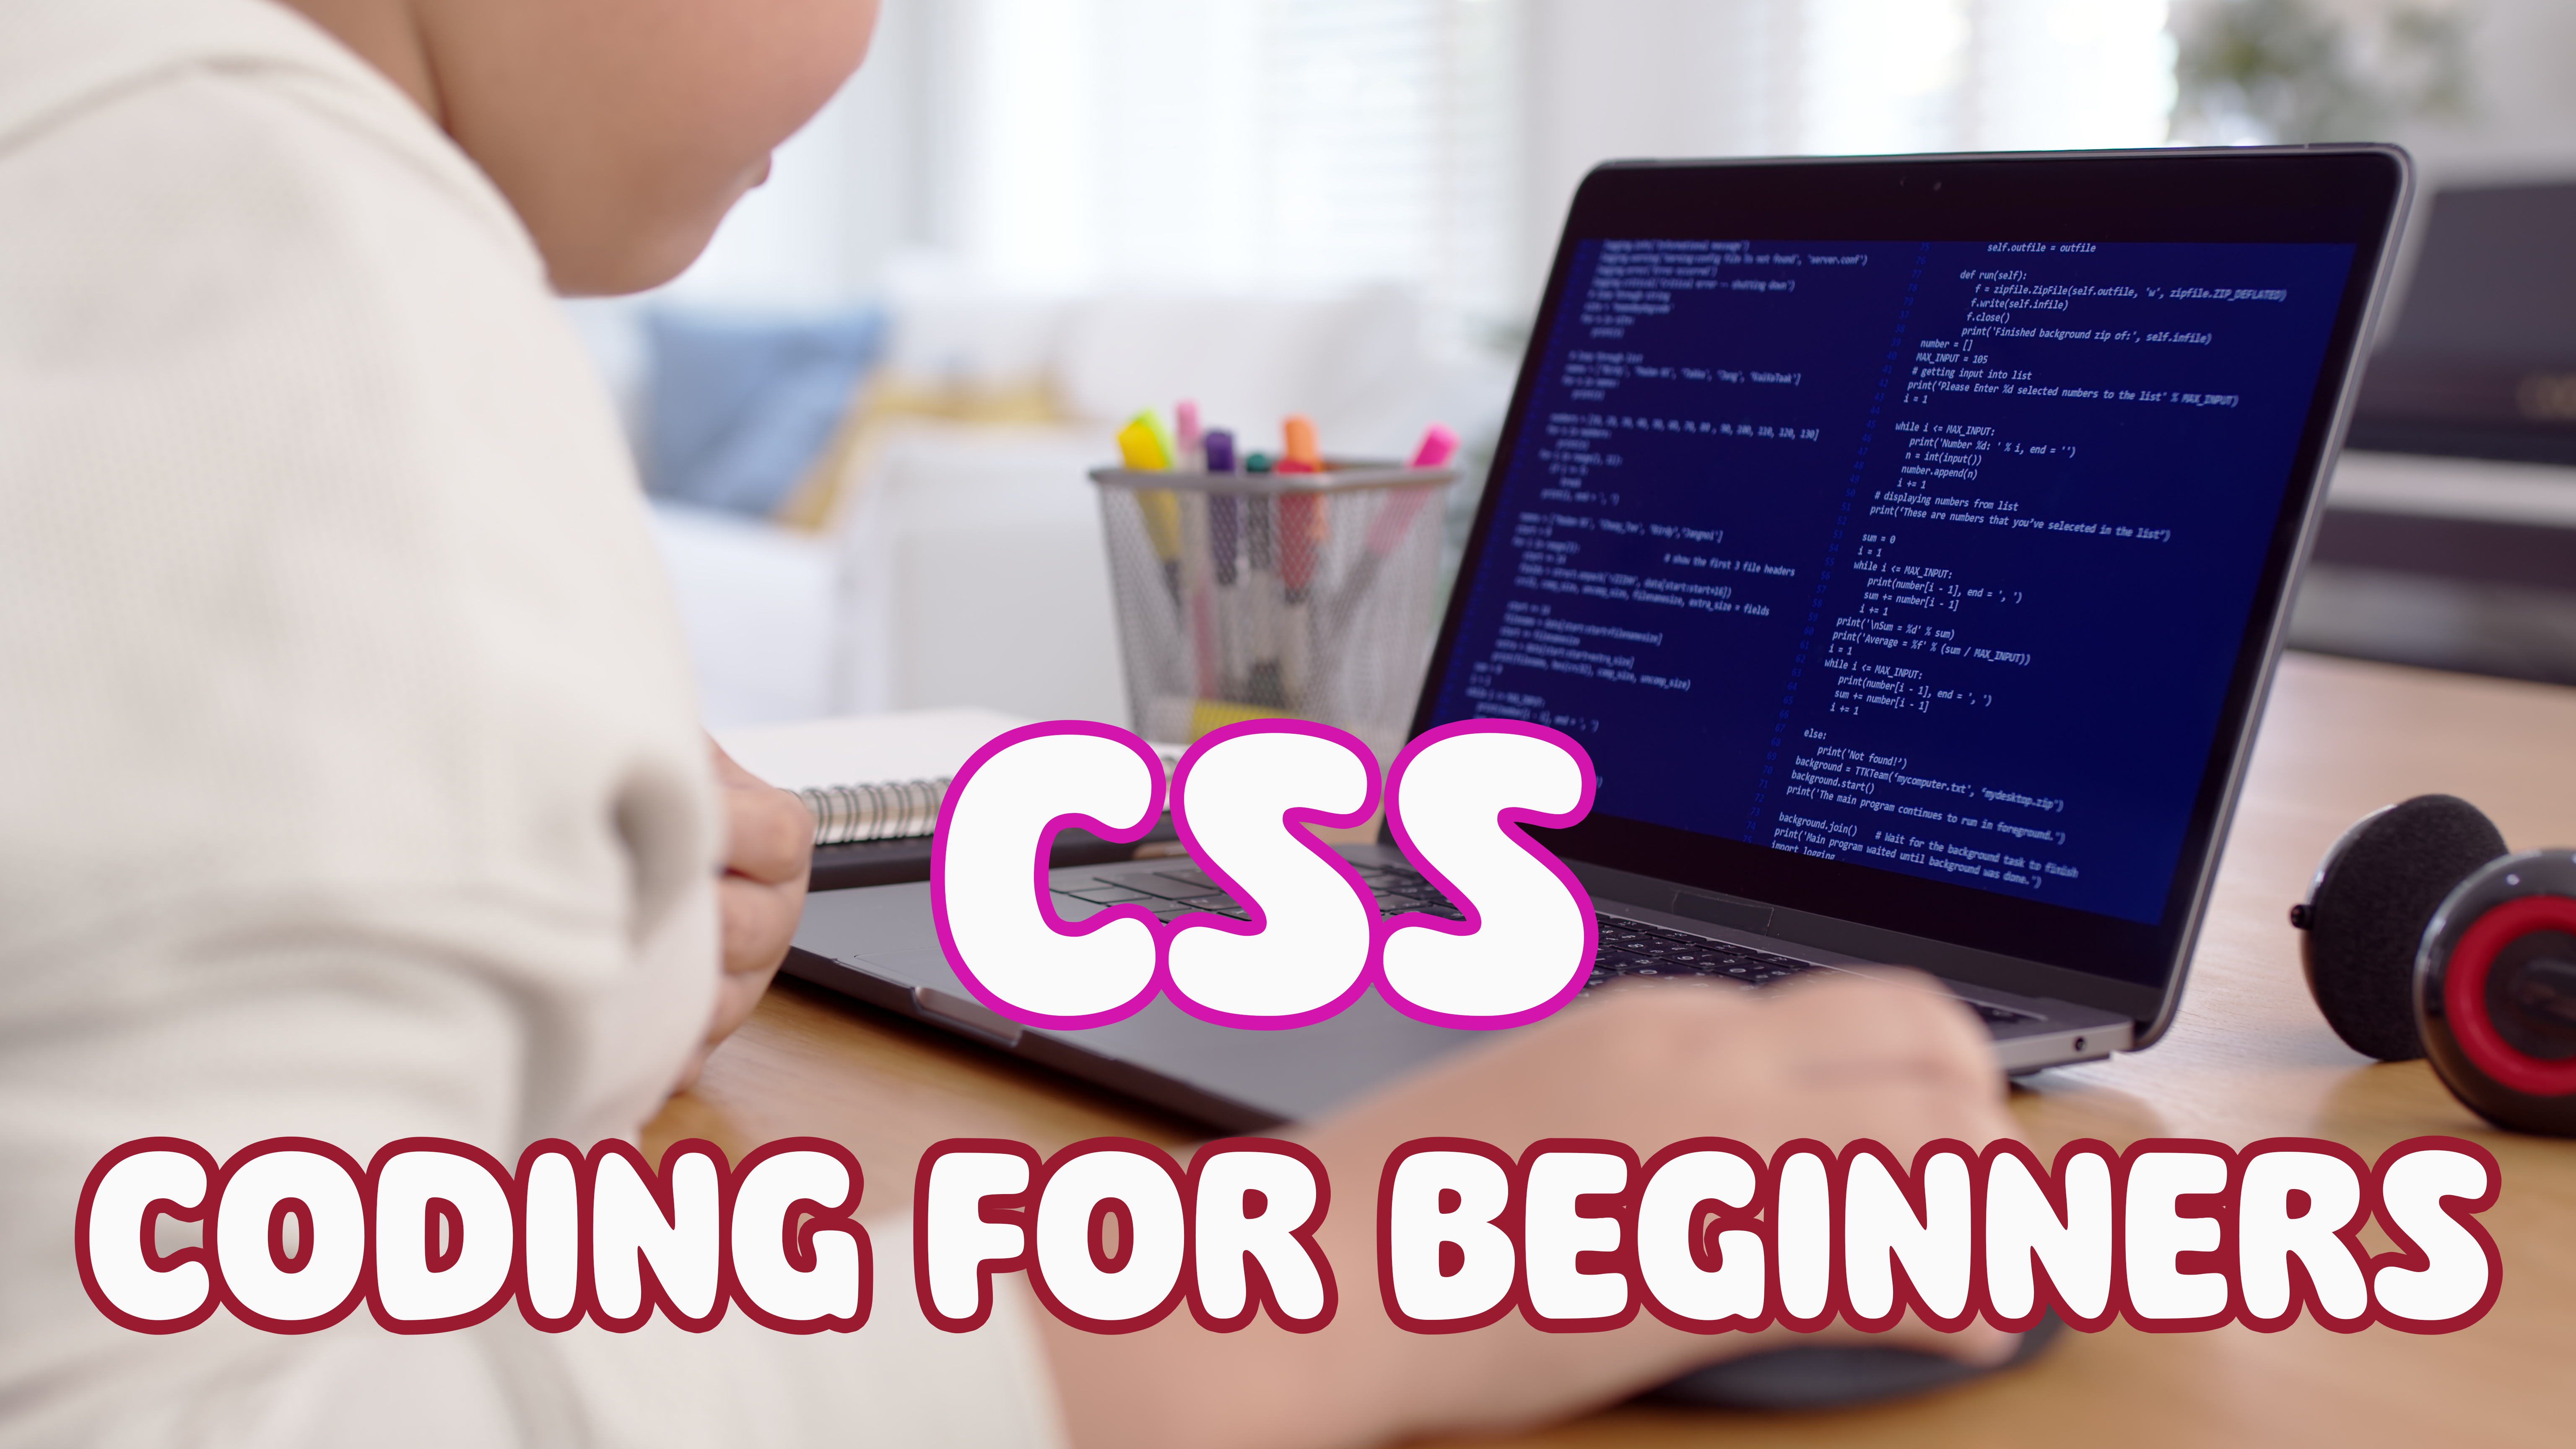 Introduction to Coding for Beginners (CSS)